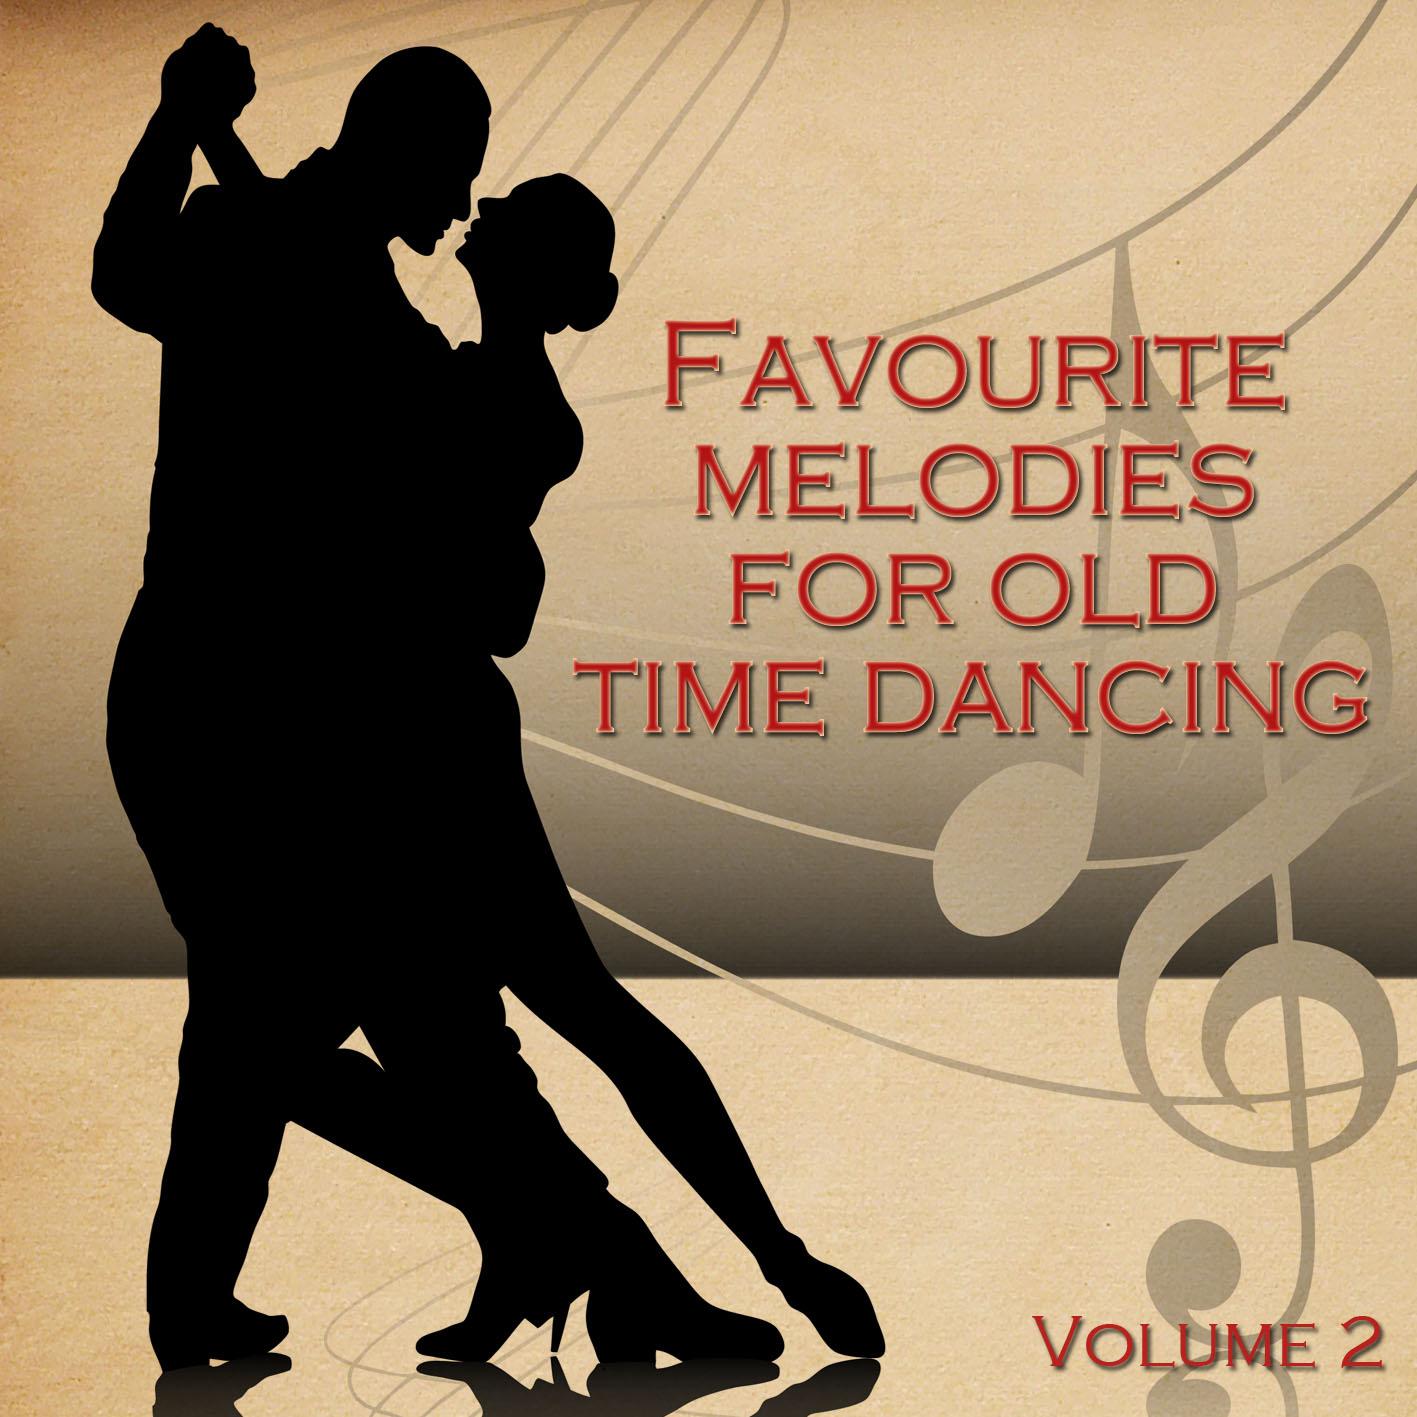 Favourite Melodies for Old Time Dancing Vol. 2